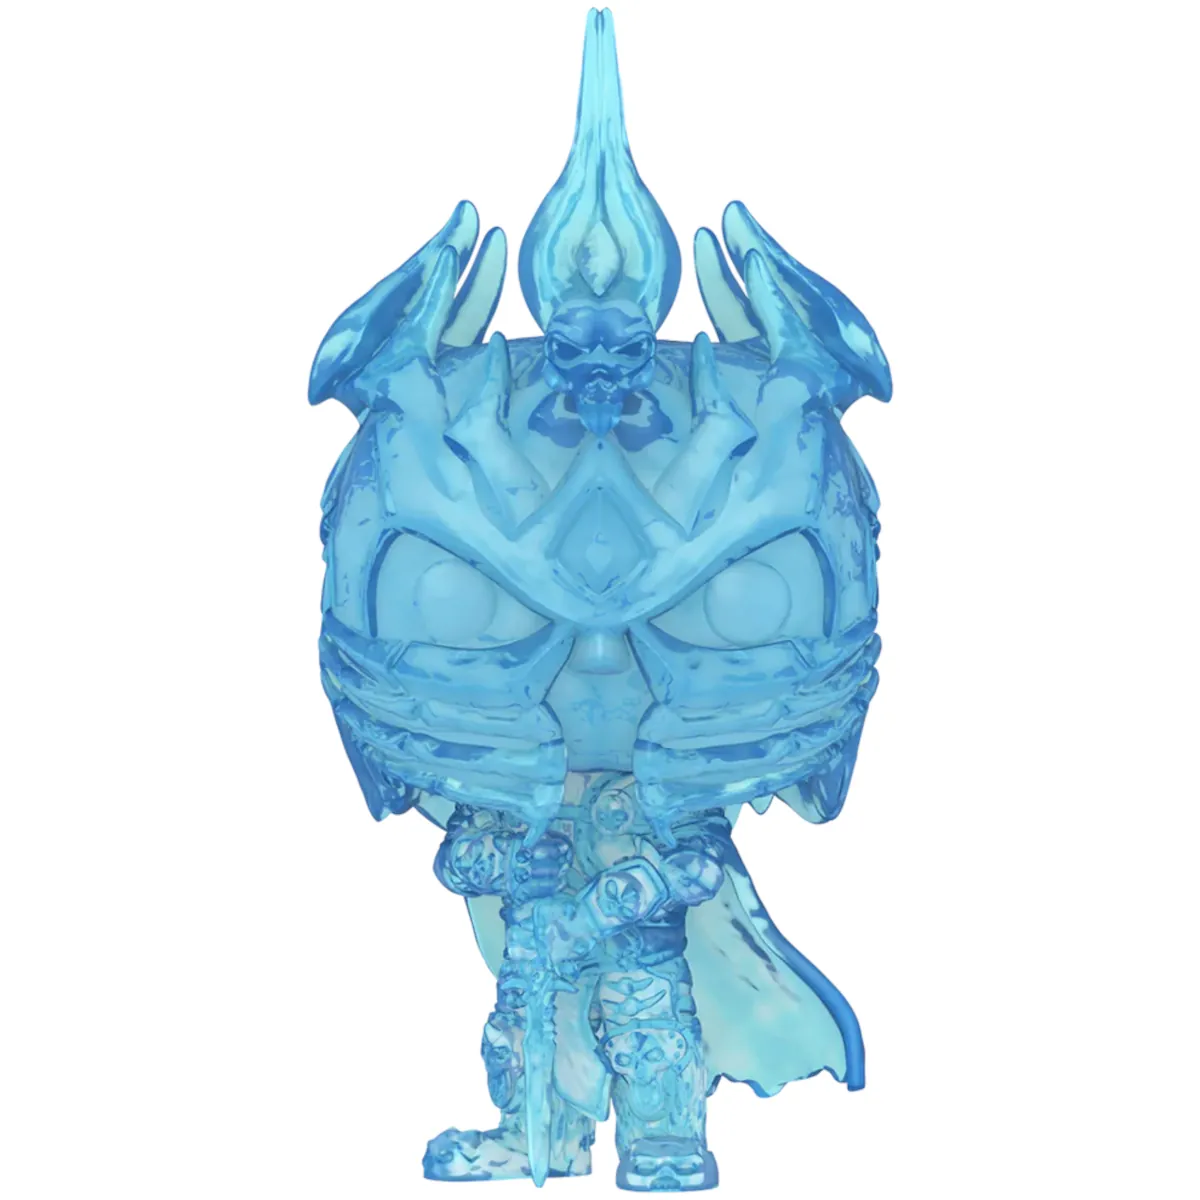 82240 Funko Pop! Games - World of Warcraft - The Lich King Collectable Vinyl Figure